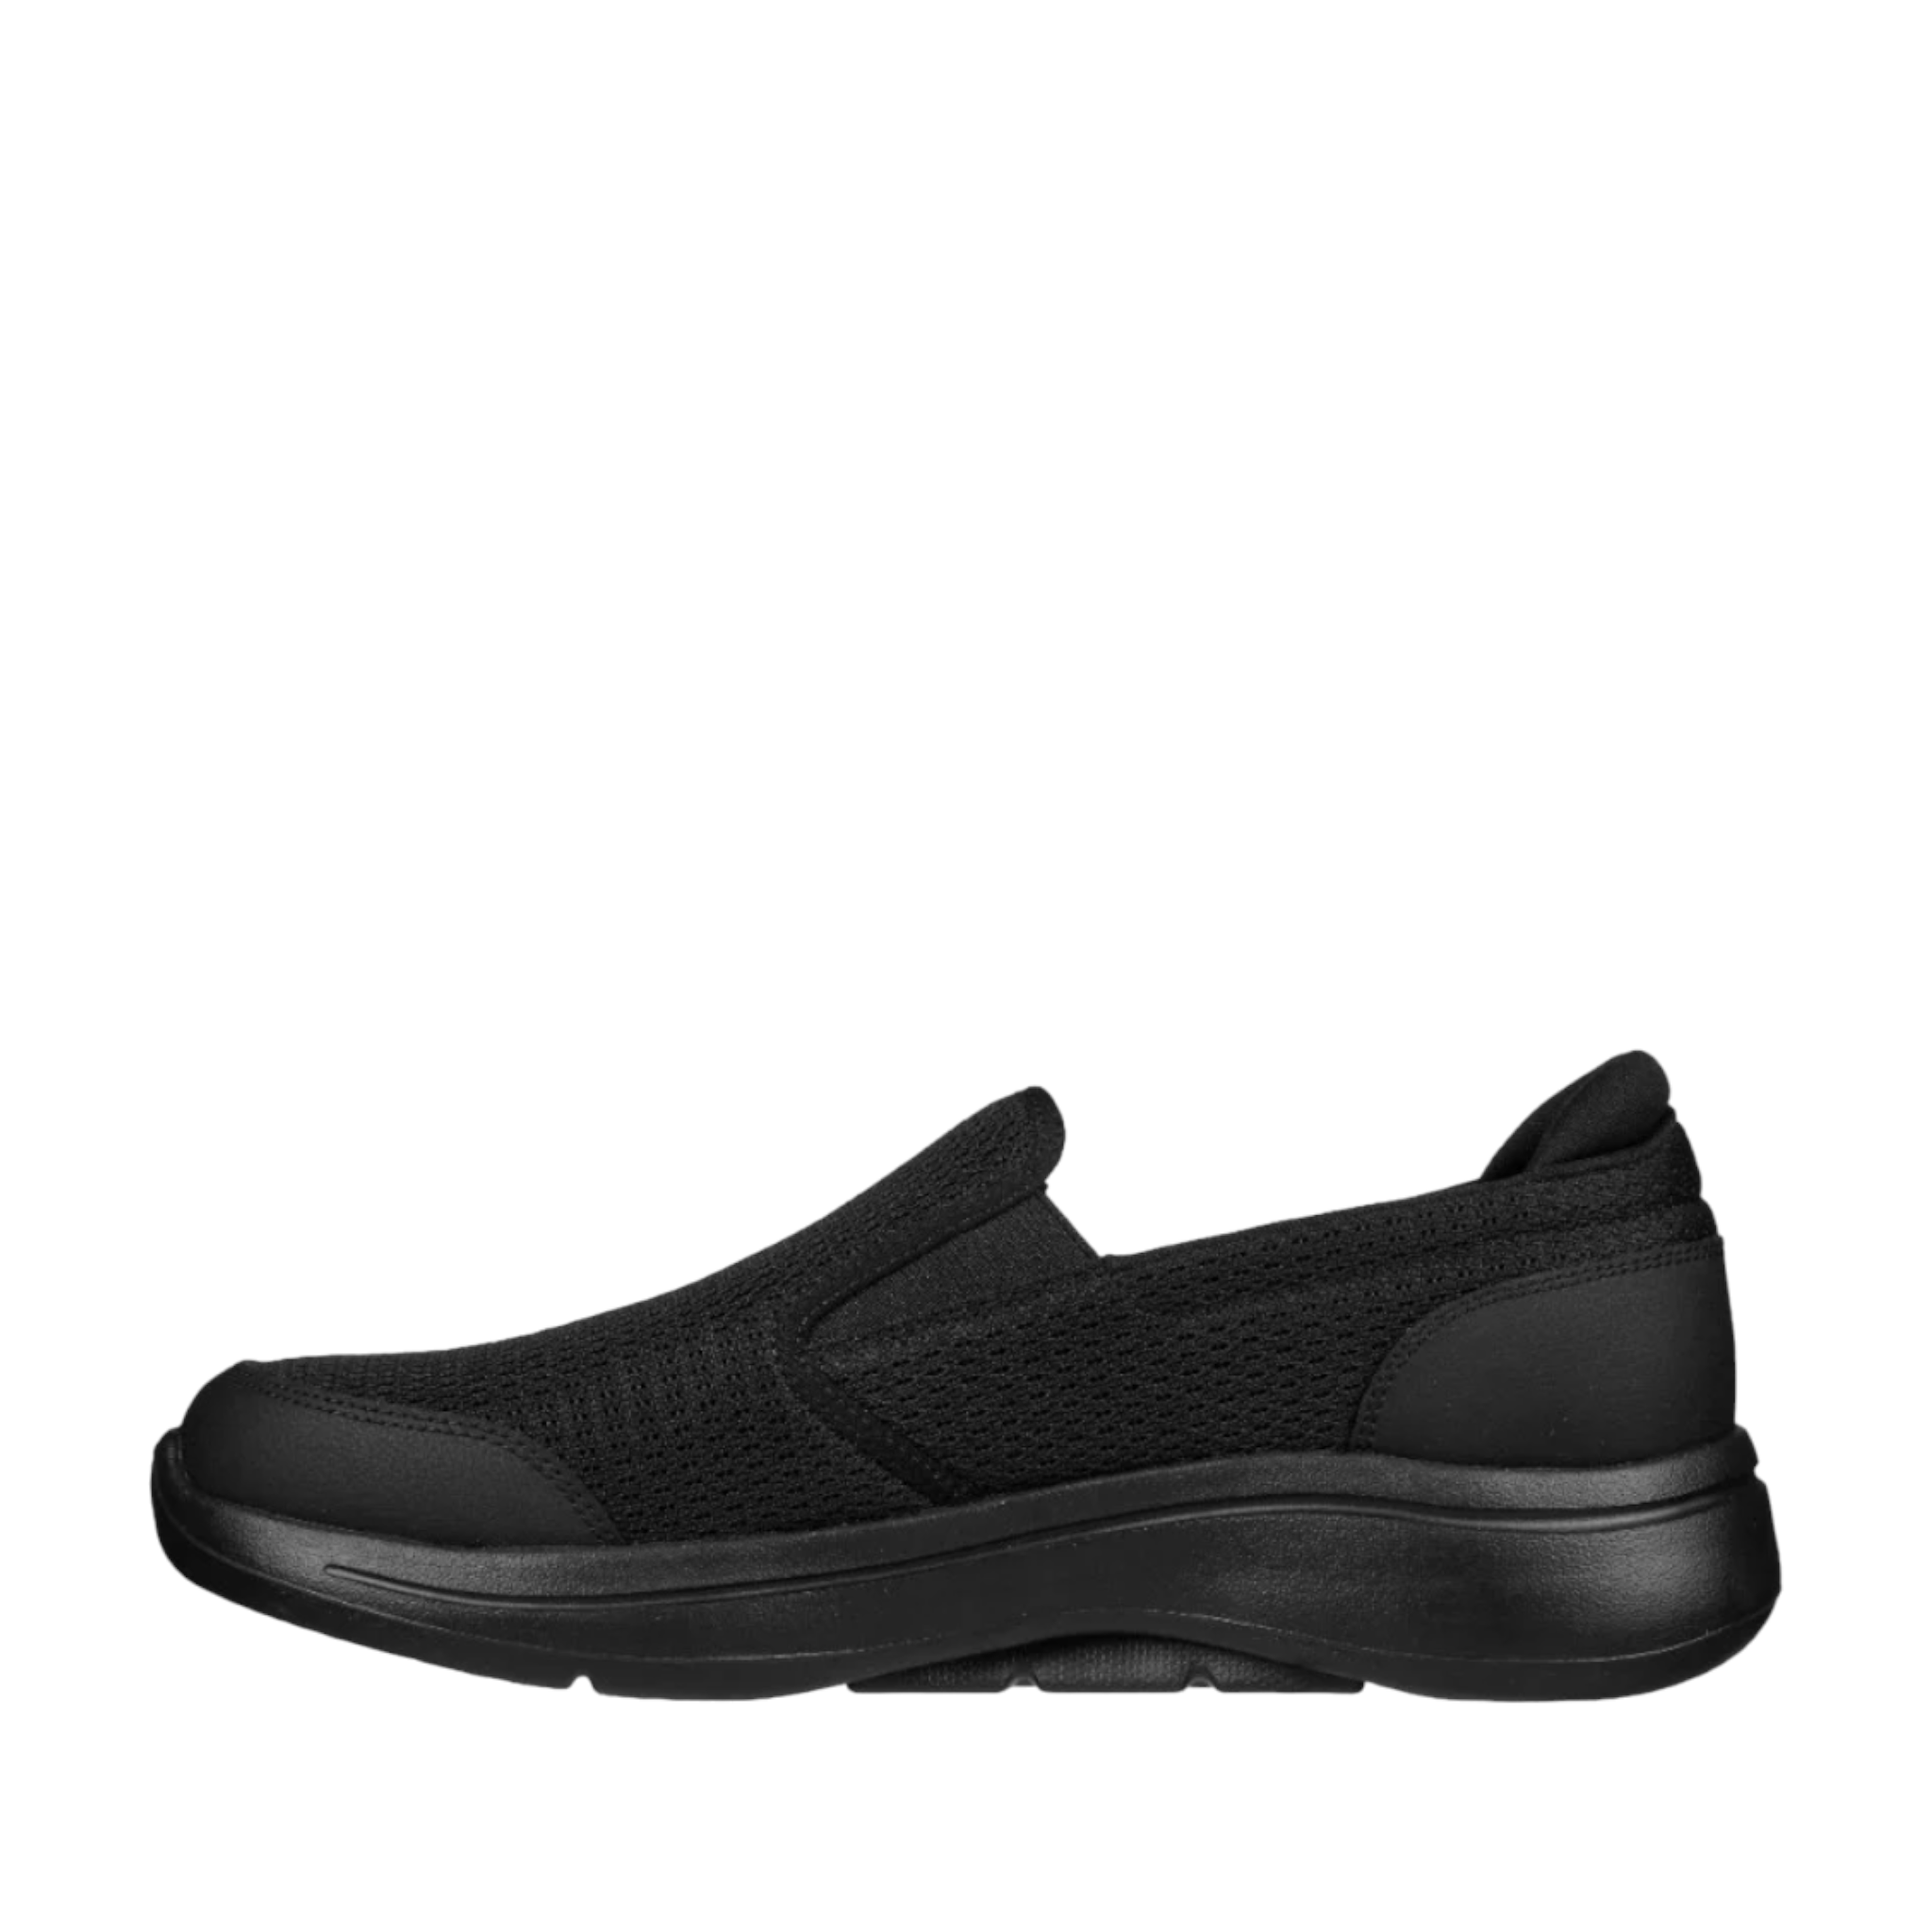 Shop Robust Comfort - with shoe&amp;me - from Skechers - Sneakers - Mens, Sneakers, Summer, Winter